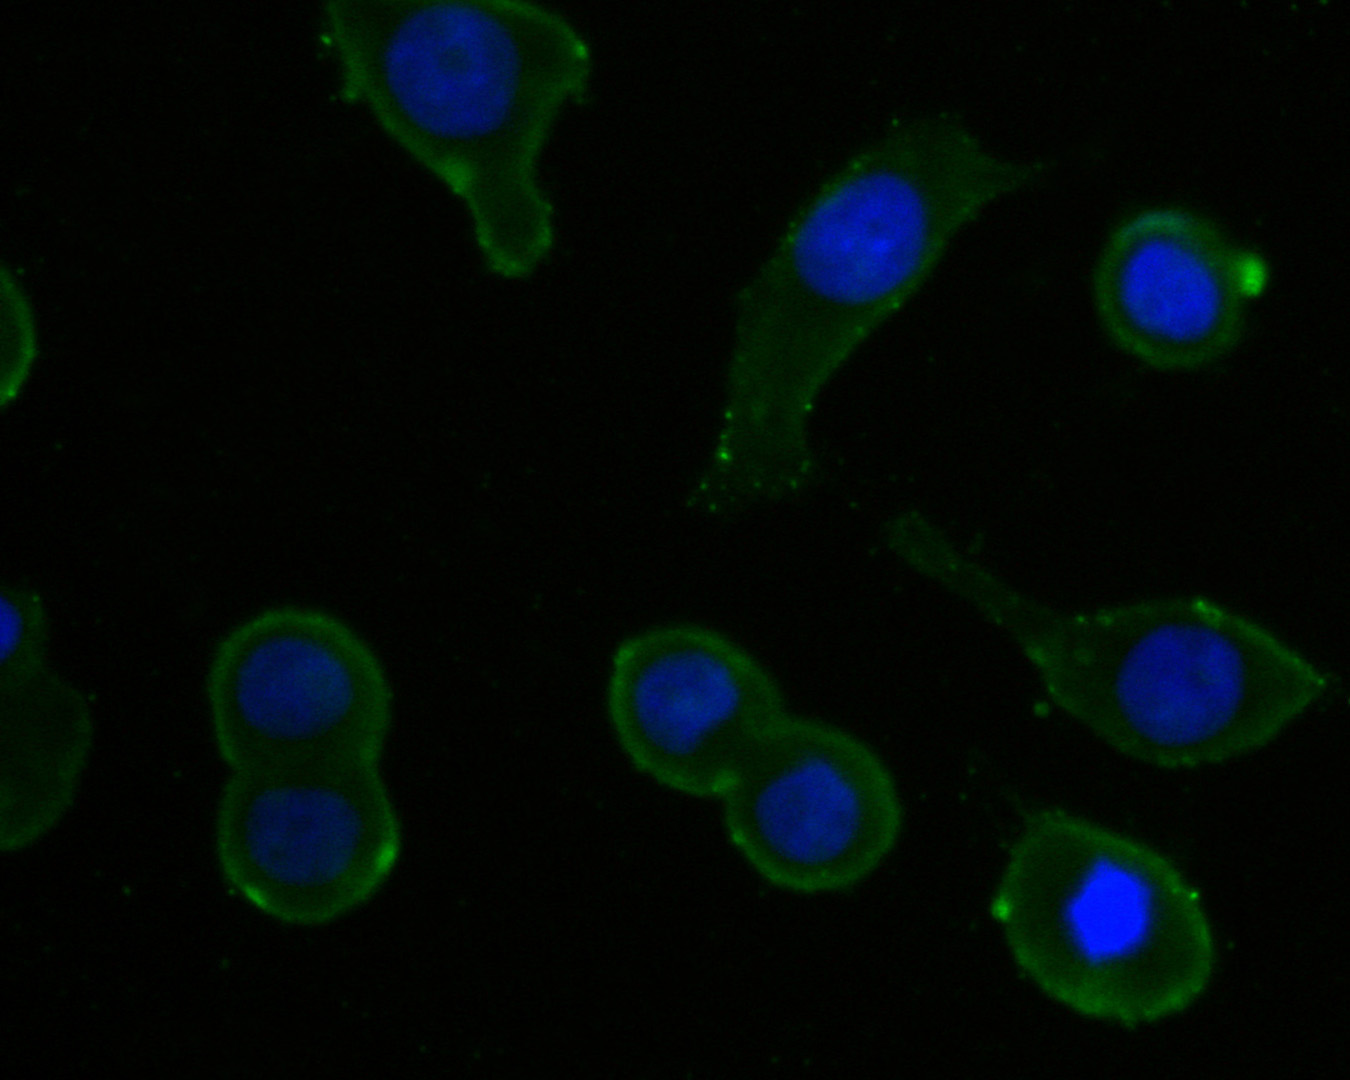 ICC staining of IL-5 in LOVO cells (green). Formalin fixed cells were permeabilized with 0.1% Triton X-100 in TBS for 10 minutes at room temperature and blocked with 1% Blocker BSA for 15 minutes at room temperature. Cells were probed with the primary antibody (HA500081, 1/200) for 1 hour at room temperature, washed with PBS. Alexa Fluor®488 Goat anti-Rabbit IgG was used as the secondary antibody at 1/1,000 dilution. The nuclear counter stain is DAPI (blue).